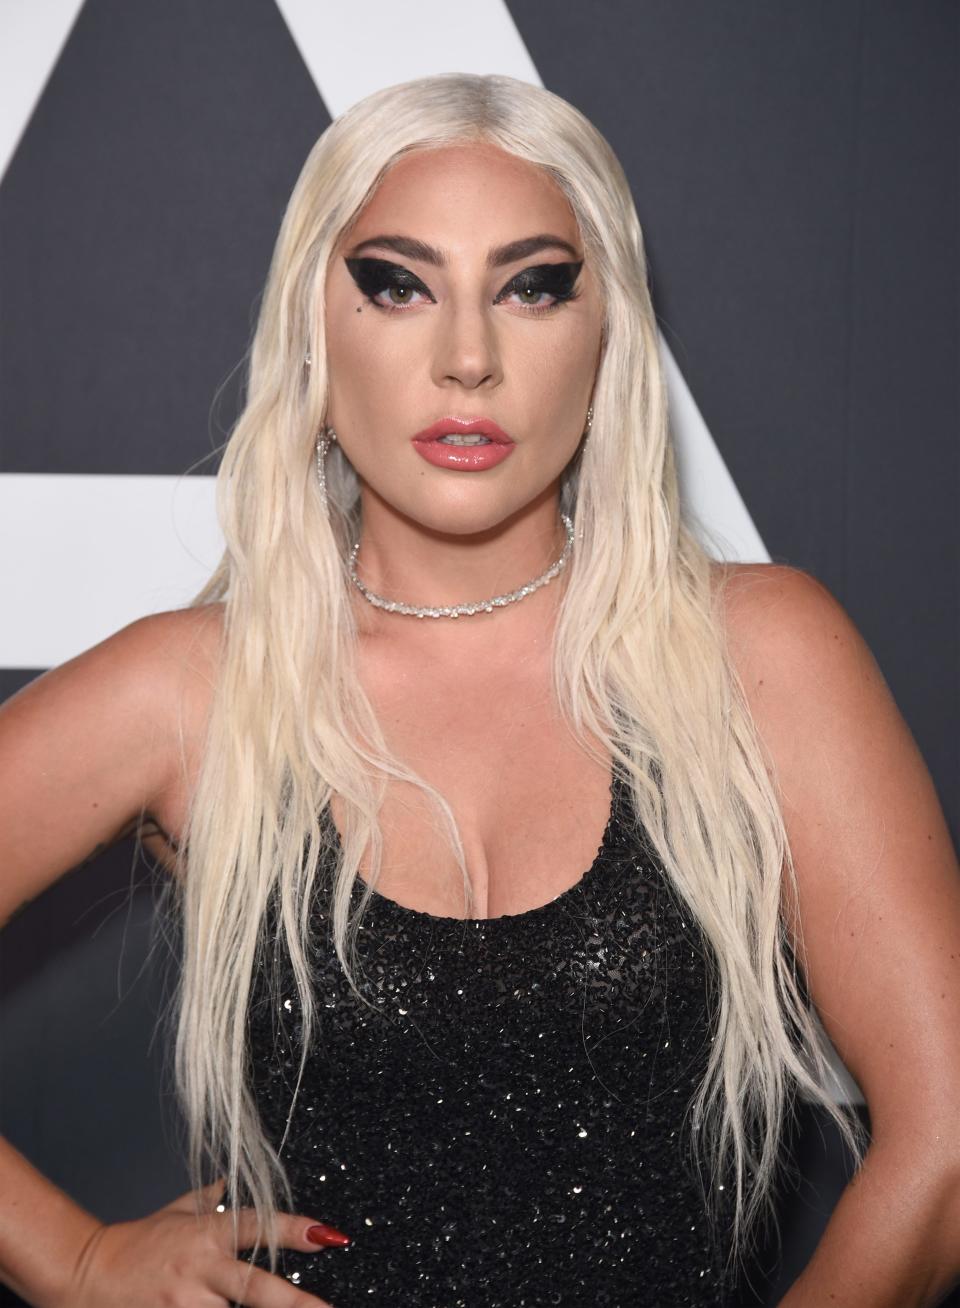 Lady Gaga argued for the importance of mental health programs in her speech at the Patron Of the Artists Awards in 2018.